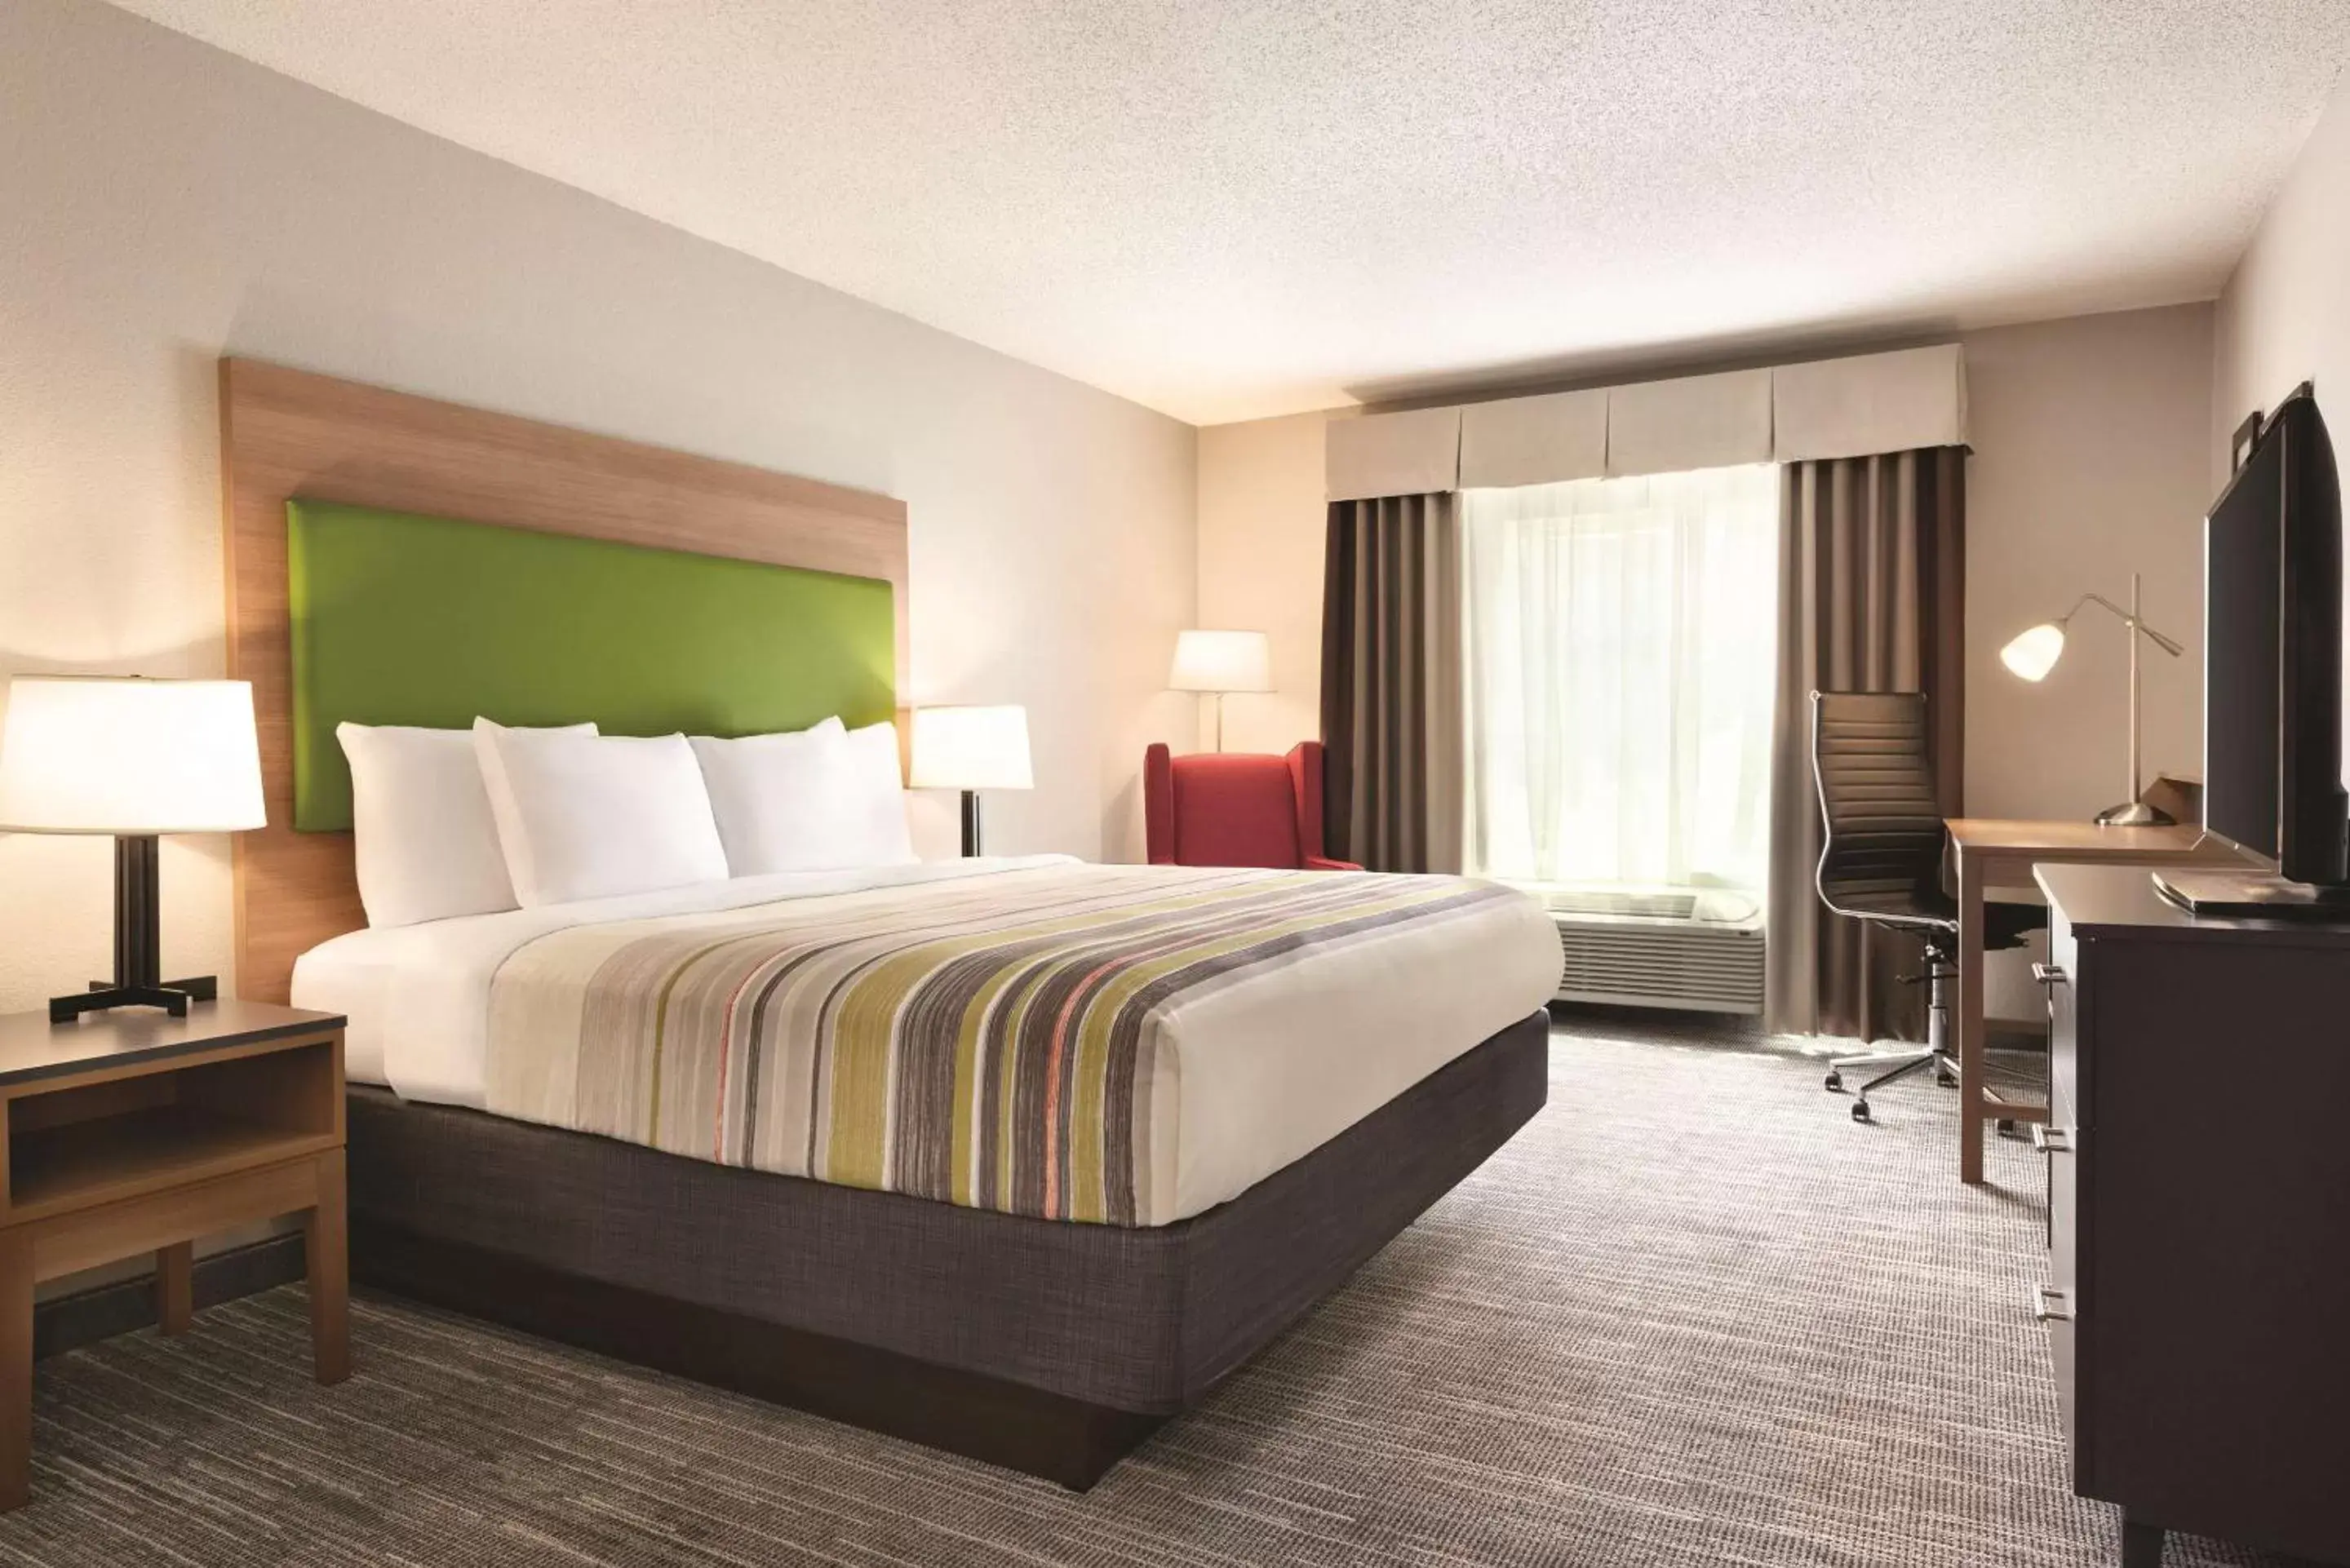 King Room in Country Inn & Suites by Radisson, Greensboro, NC